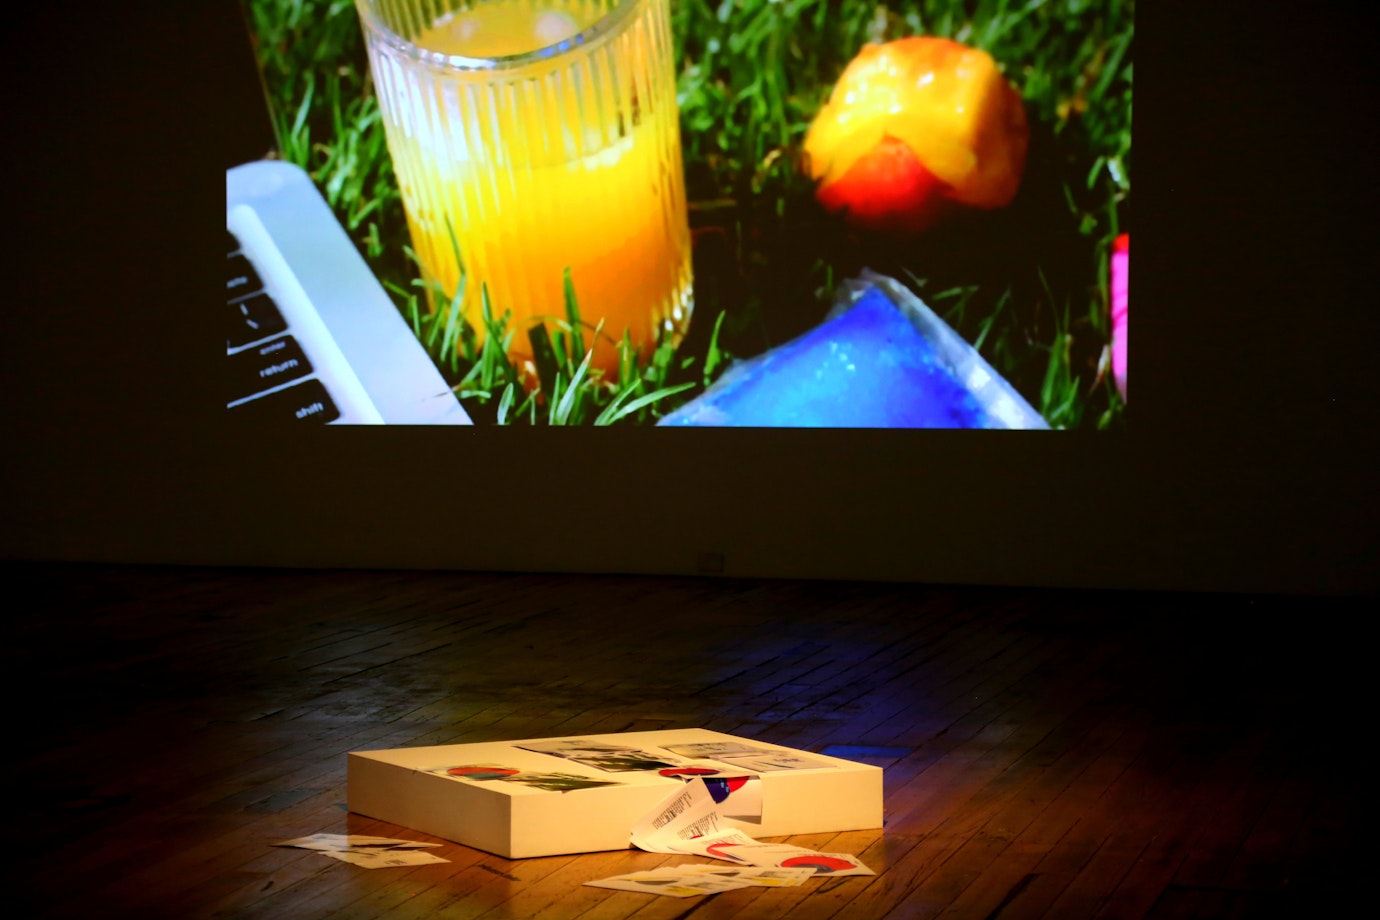 In the foreground a white block lies on the ground covered in scattered pages of images and text. In the background is a projection of the video Future Love